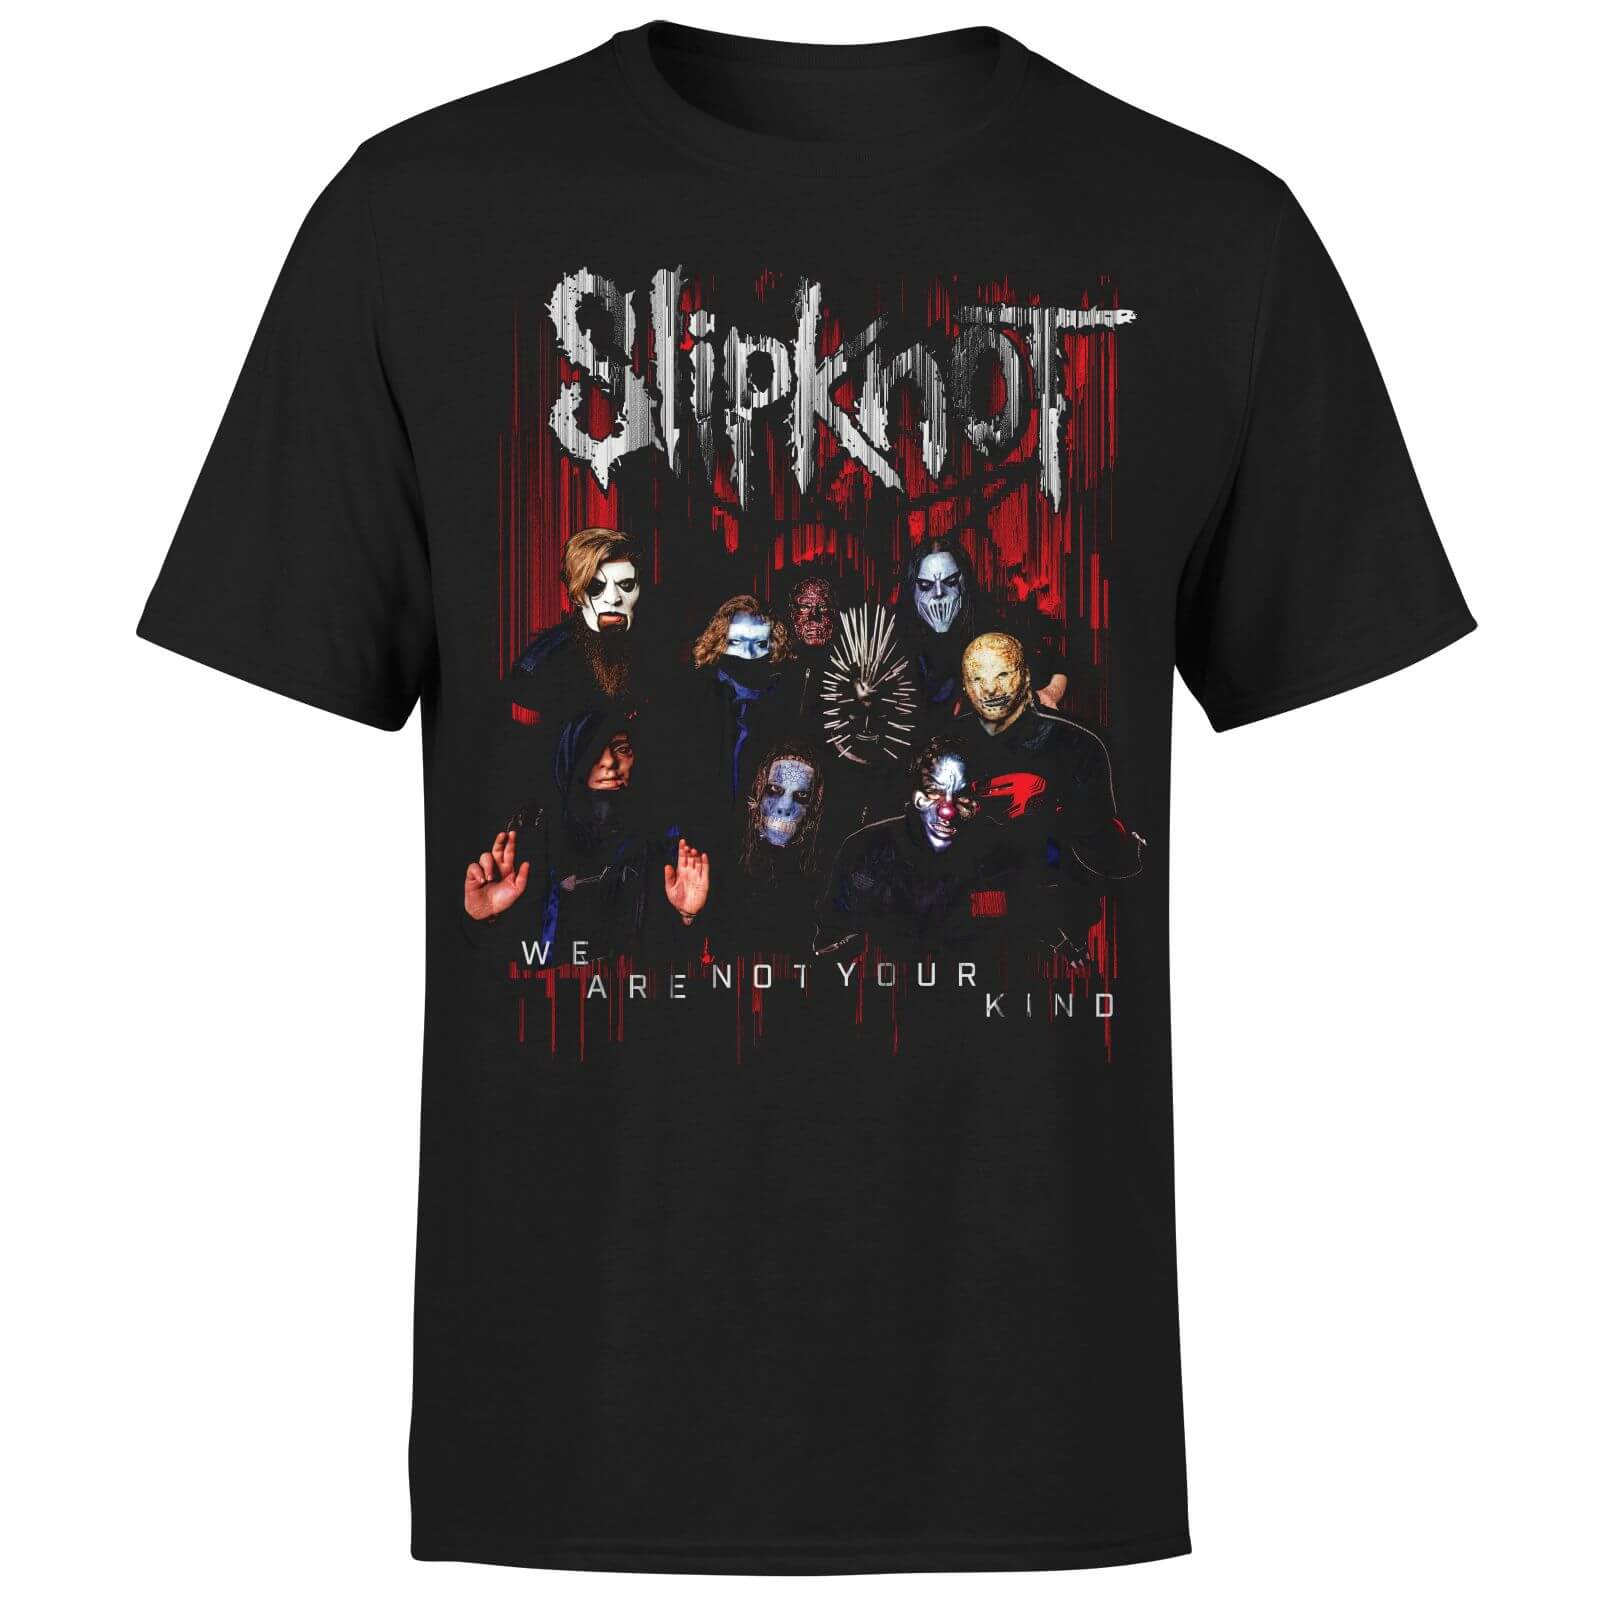 Slipknot We Are Not Your Kind Group Photo T-Shirt - Black - M - Black